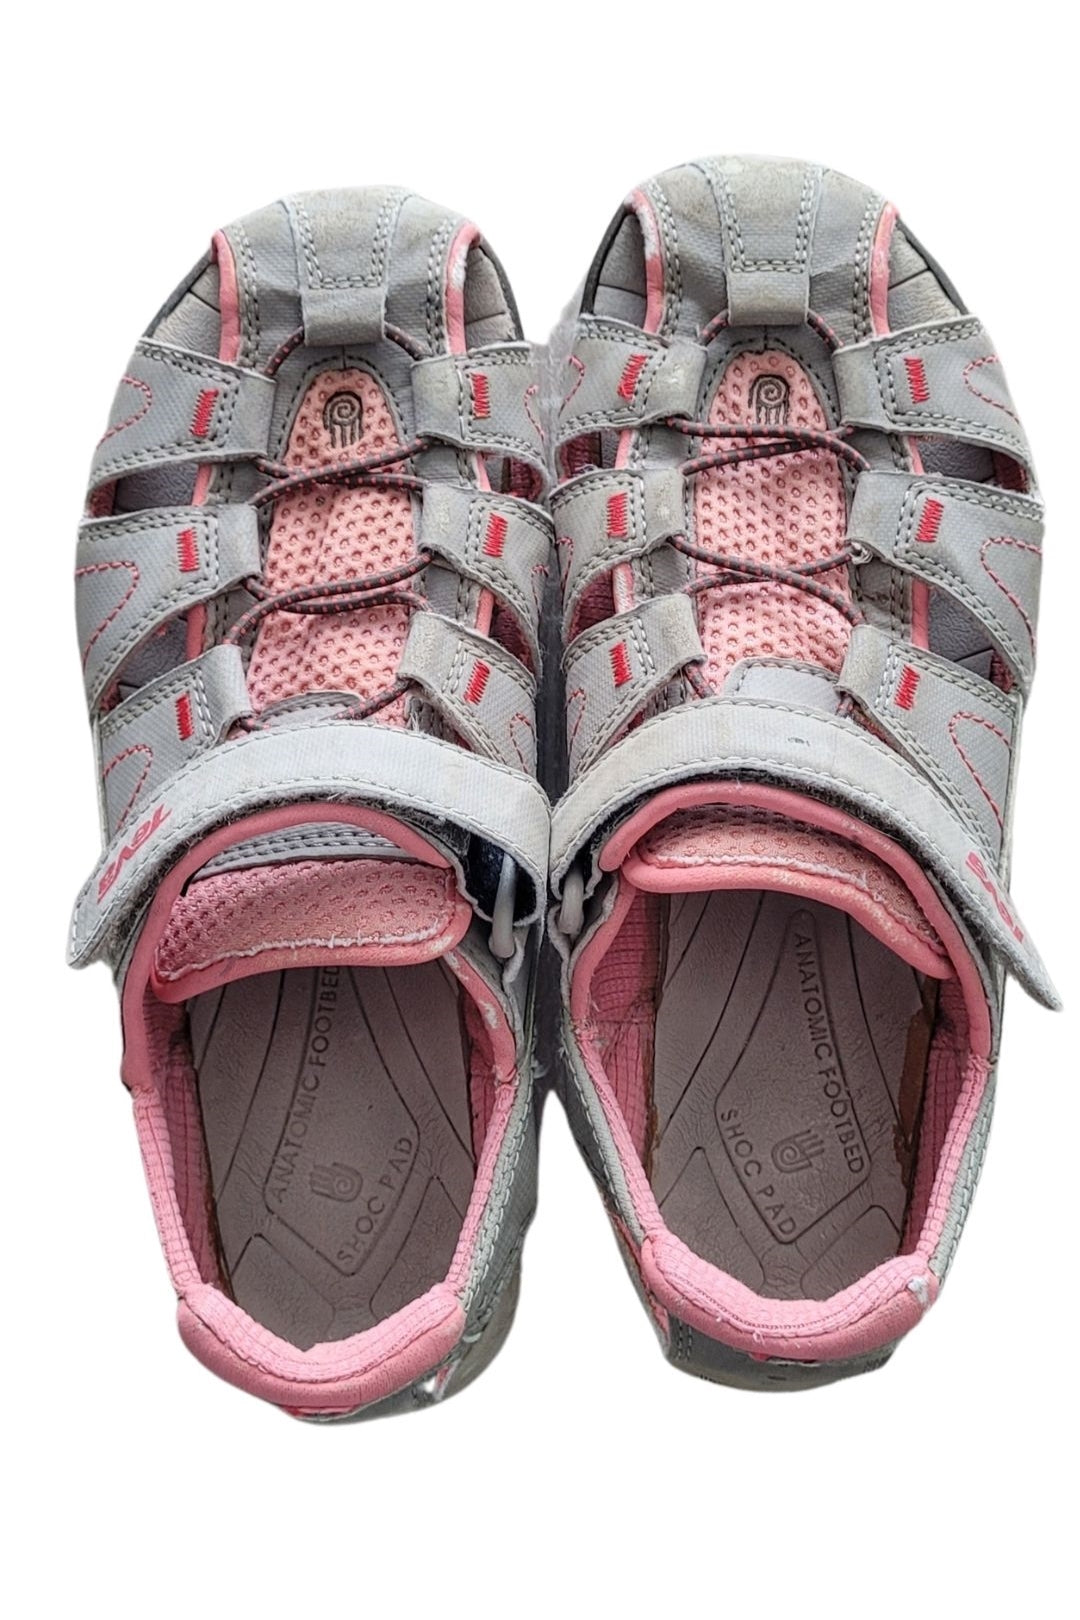 Used Kids Dozer Sandal by Teva Youth Size 5-Tan and Pink